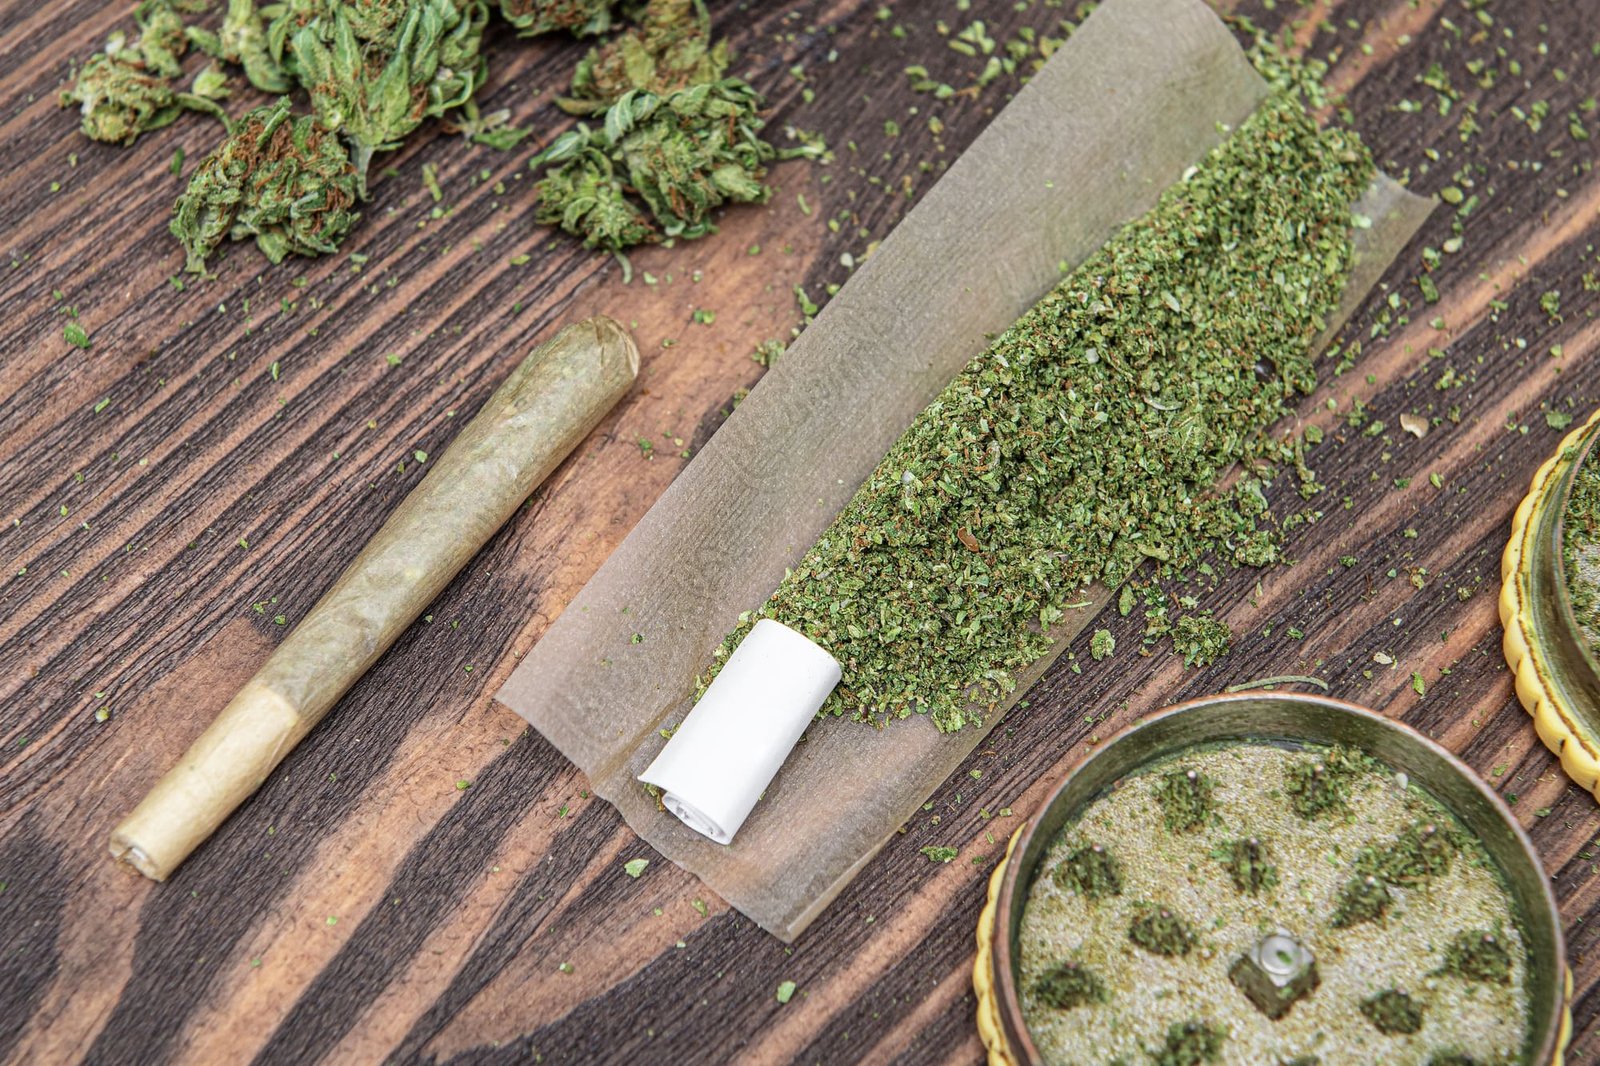 How Are Joints And Pre-Rolls Different?